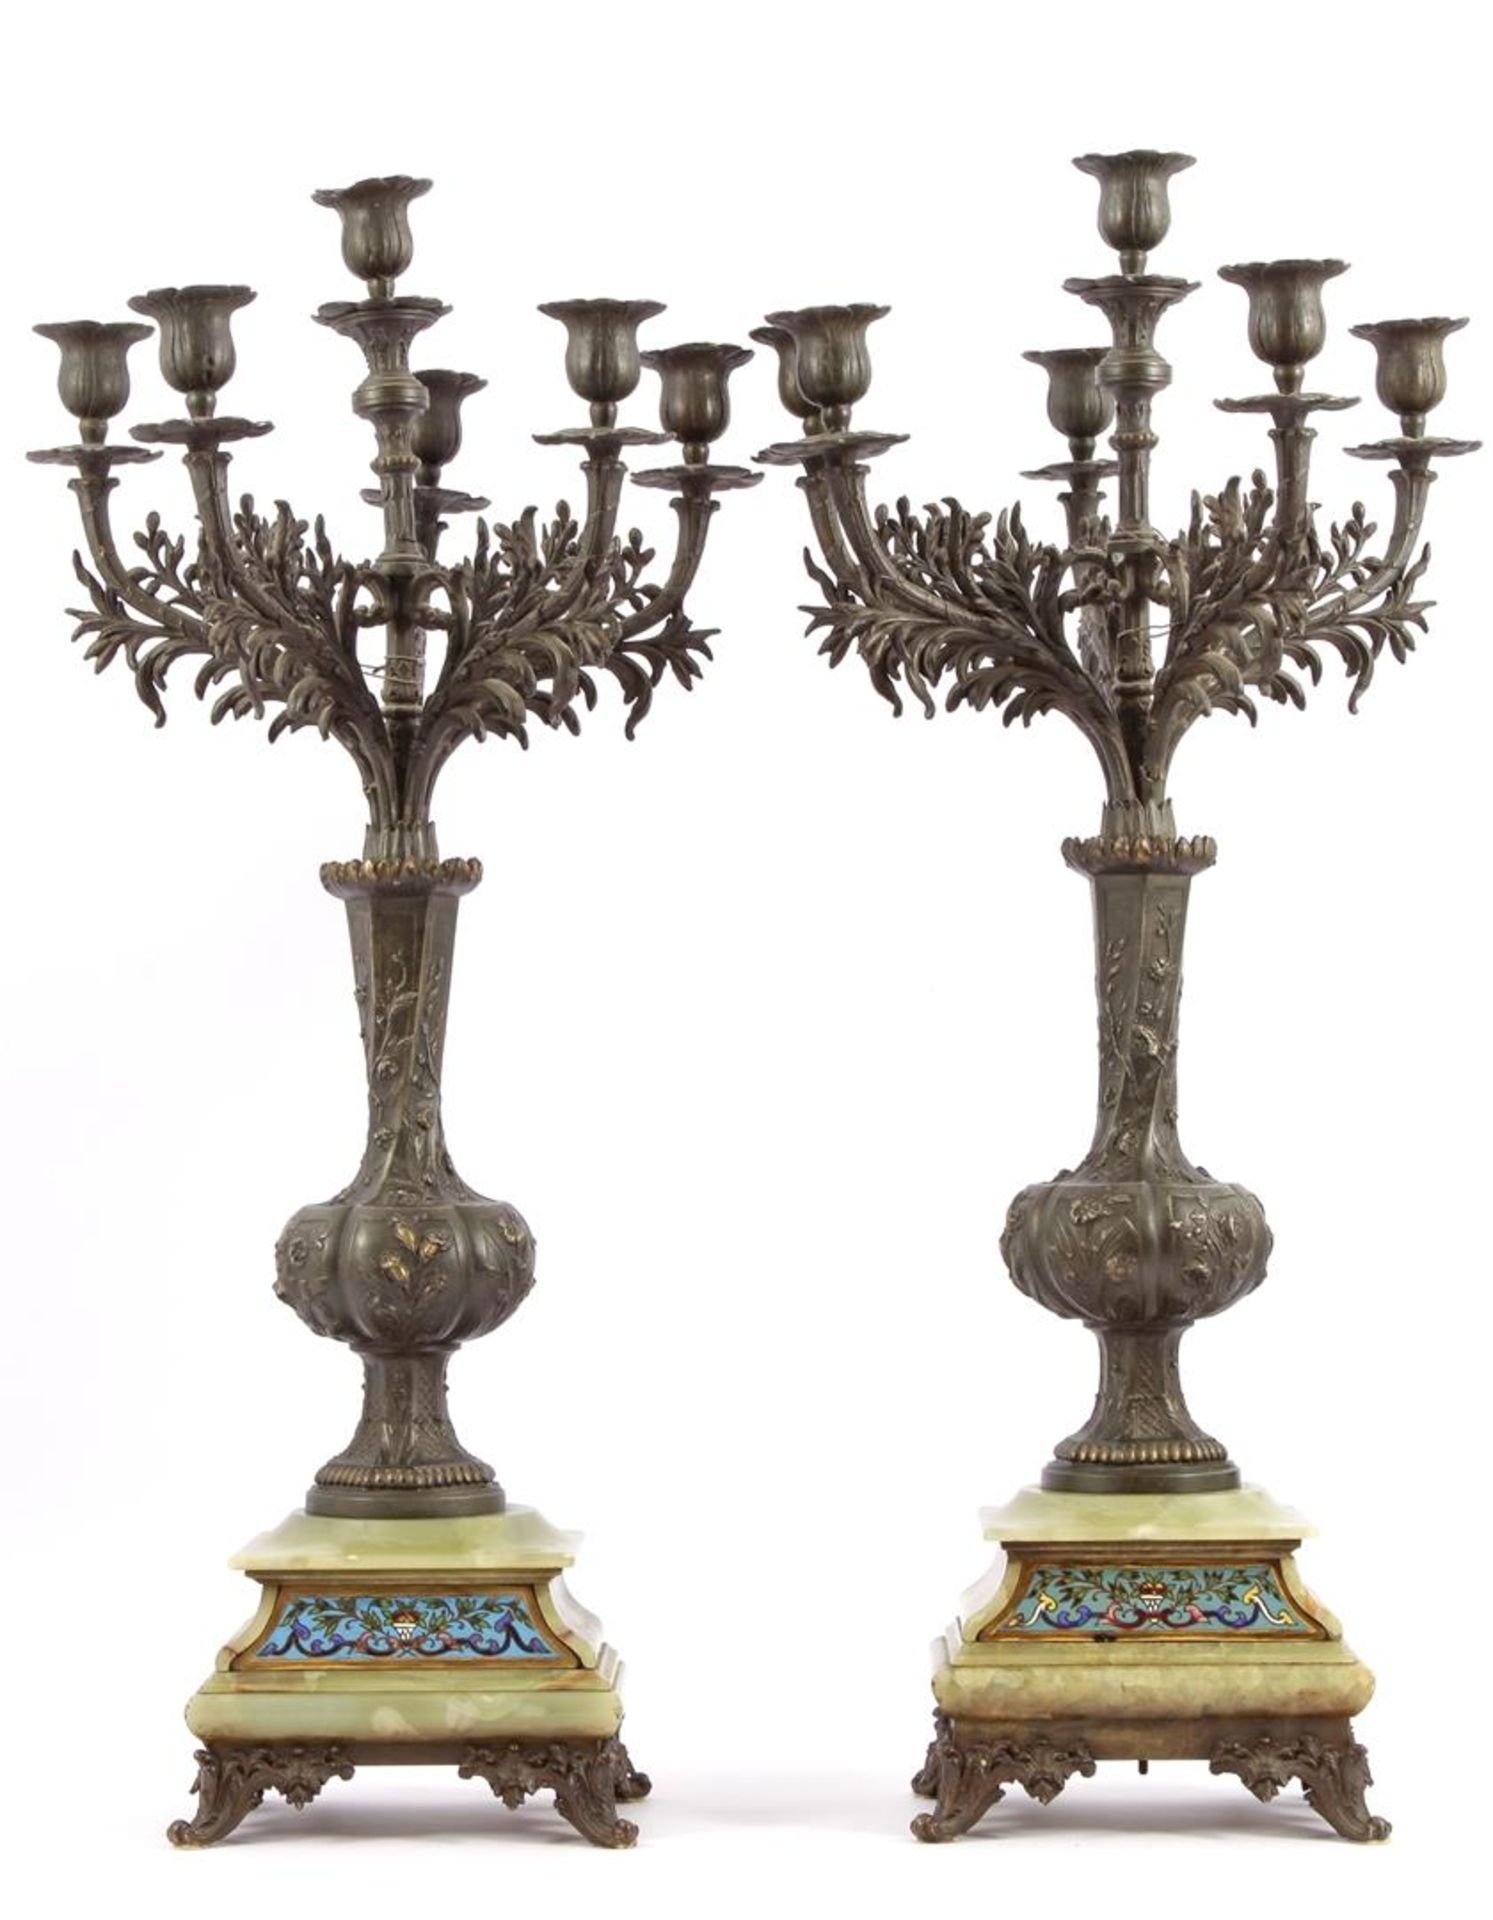 2 metal bronze-colored 6-light candlesticks on onyx base with cloisonne front decoration, 69 cm